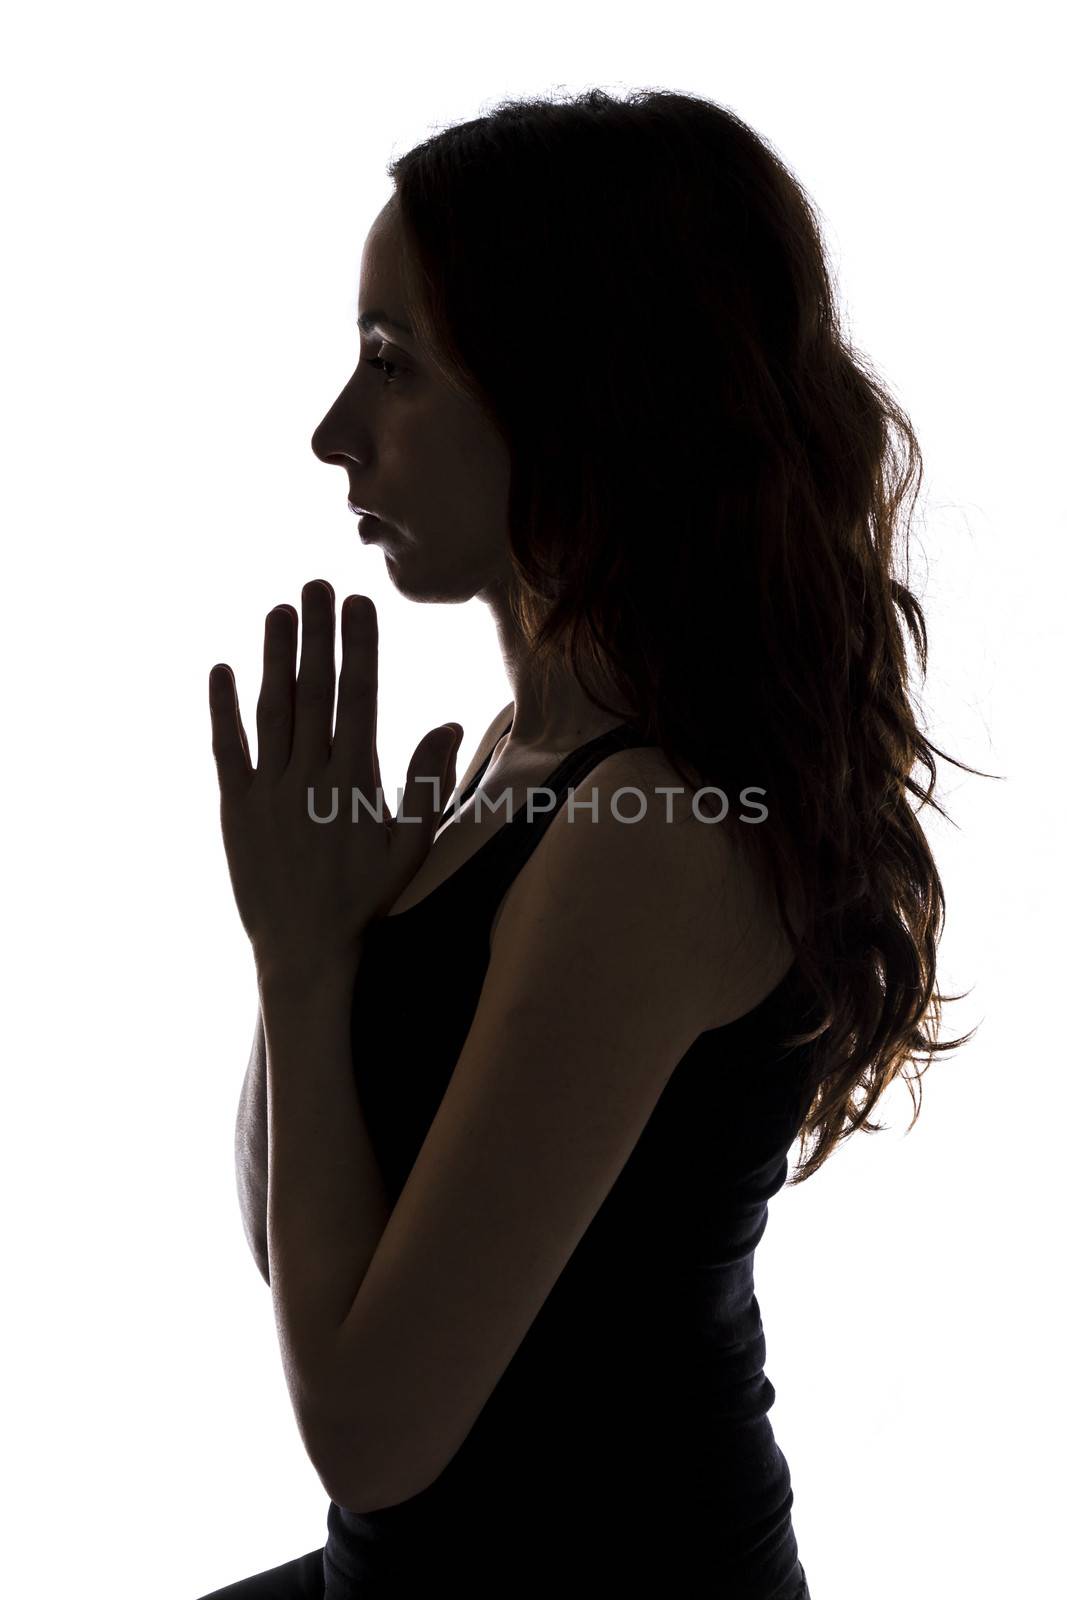 Meditating young woman, silhouette by snowwhite